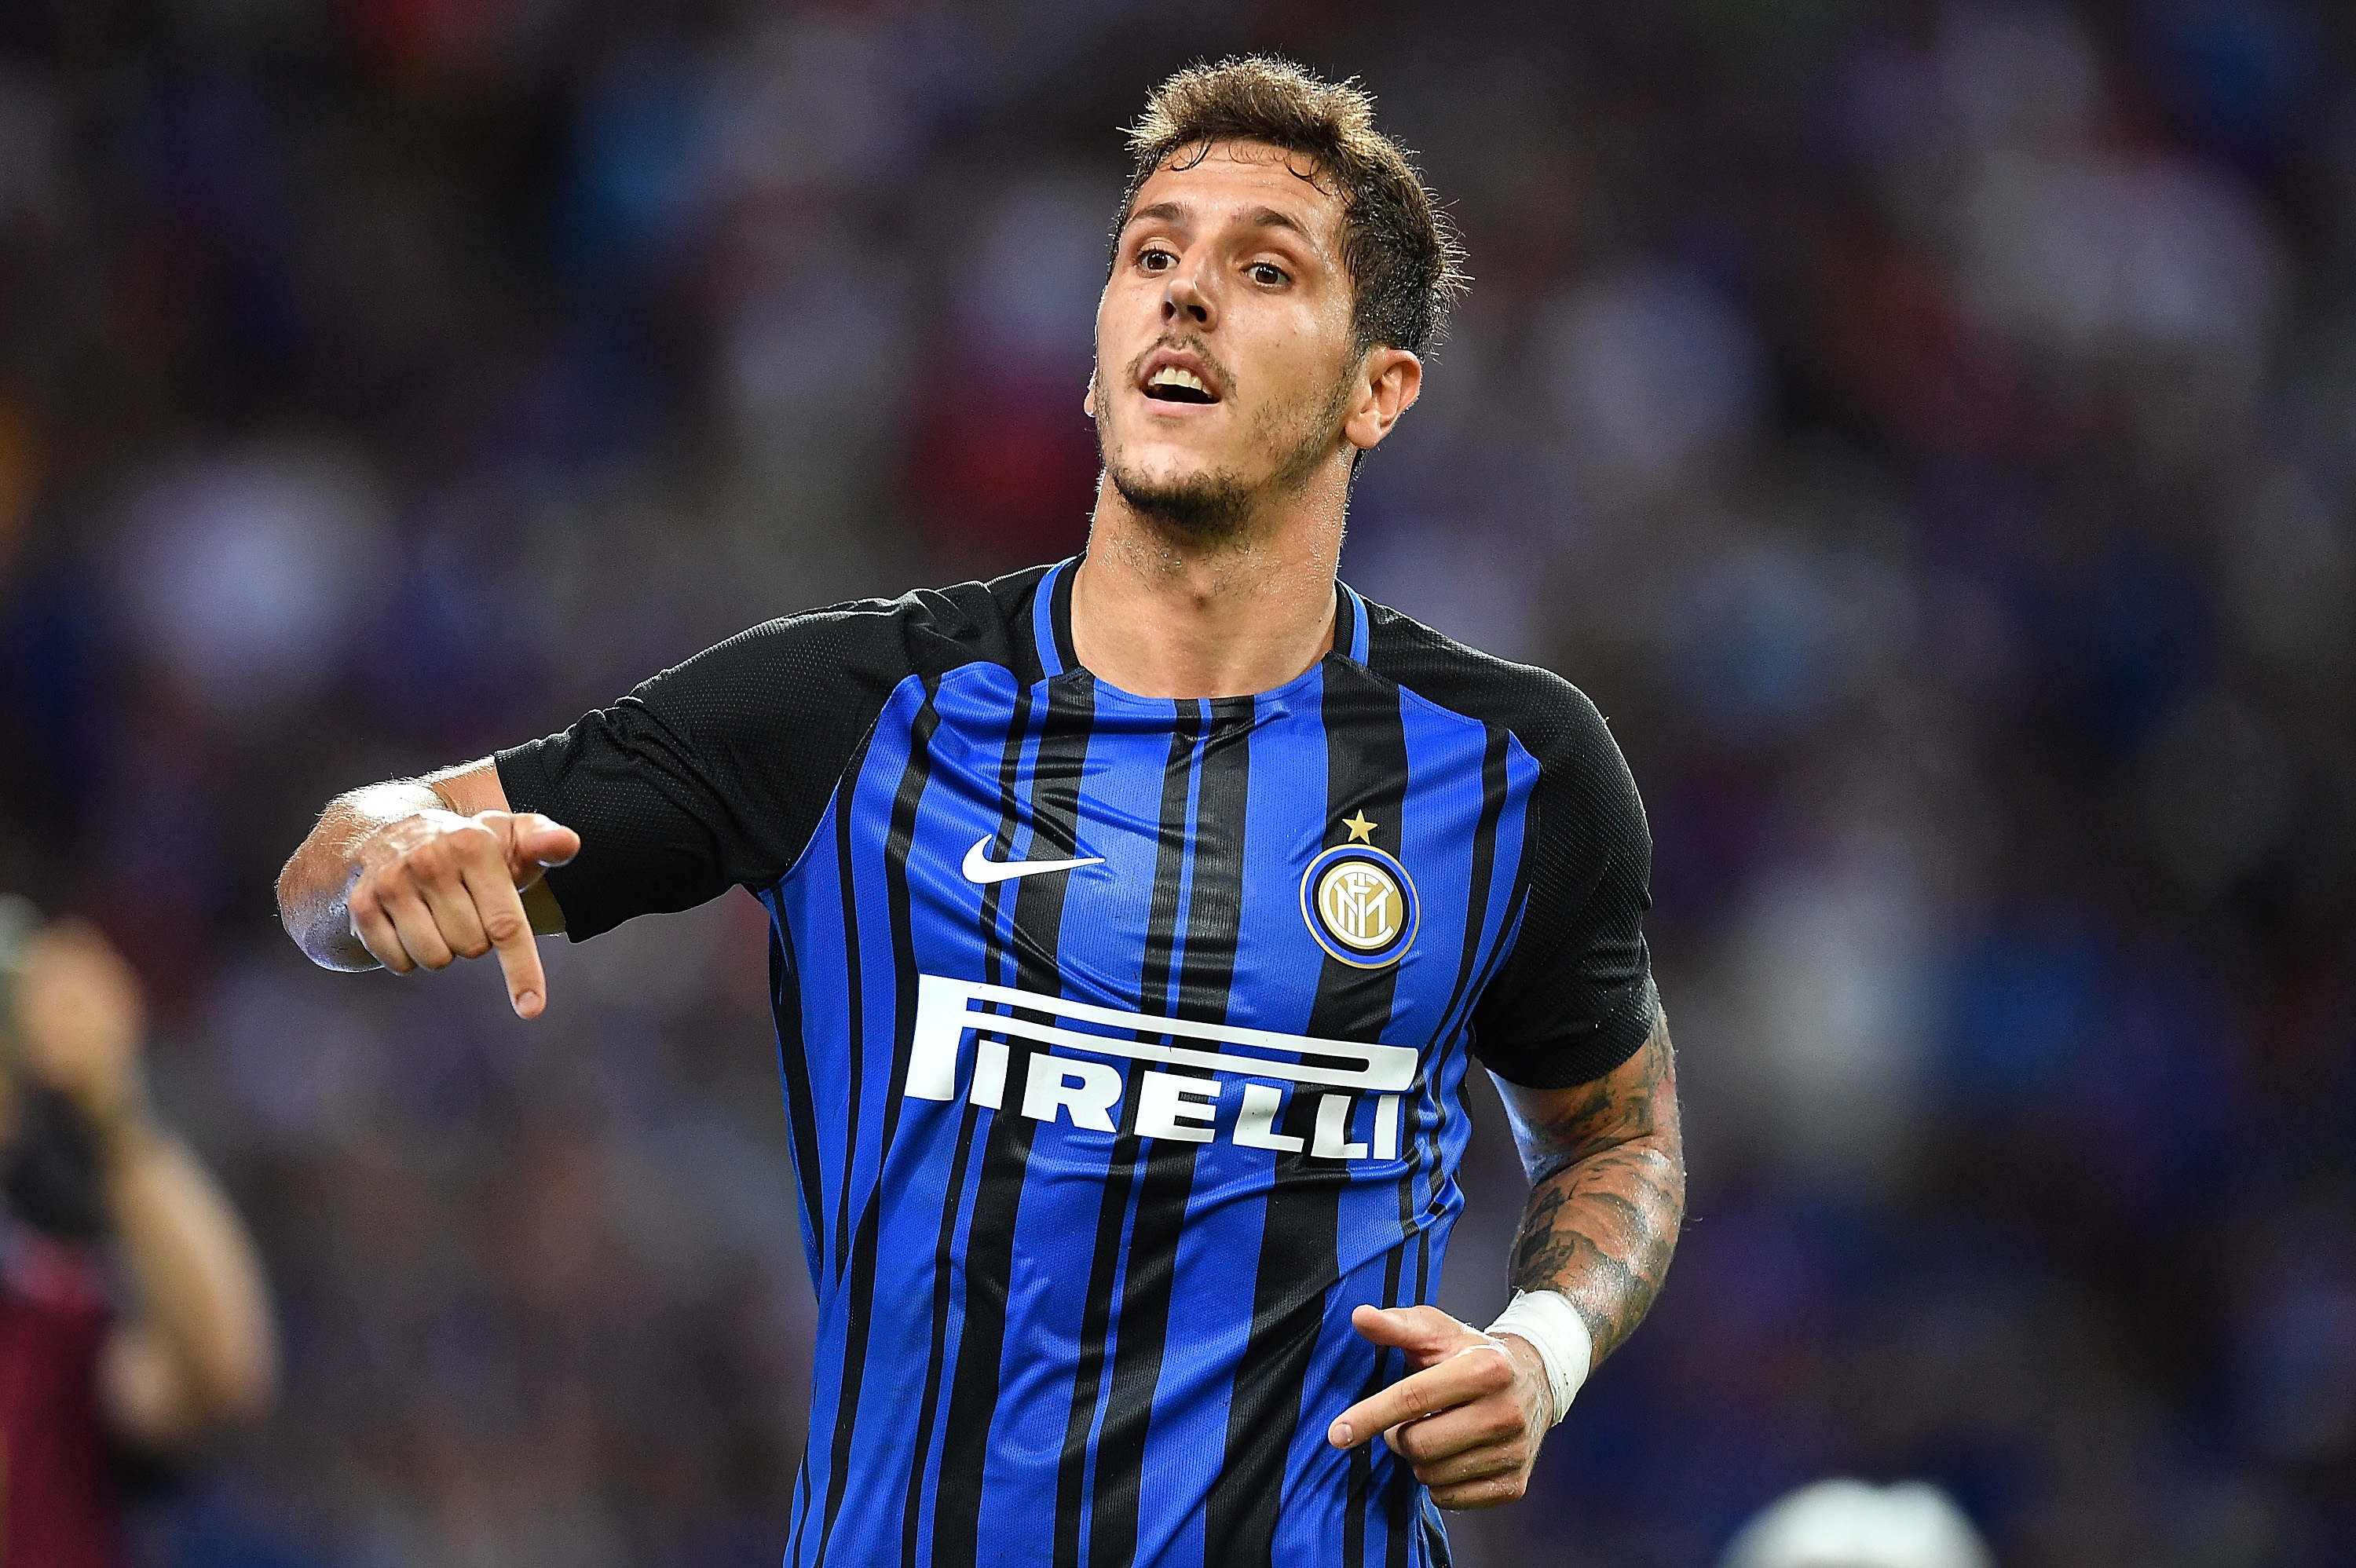 Sky – Stevan Jovetic met with his agent to discuss future